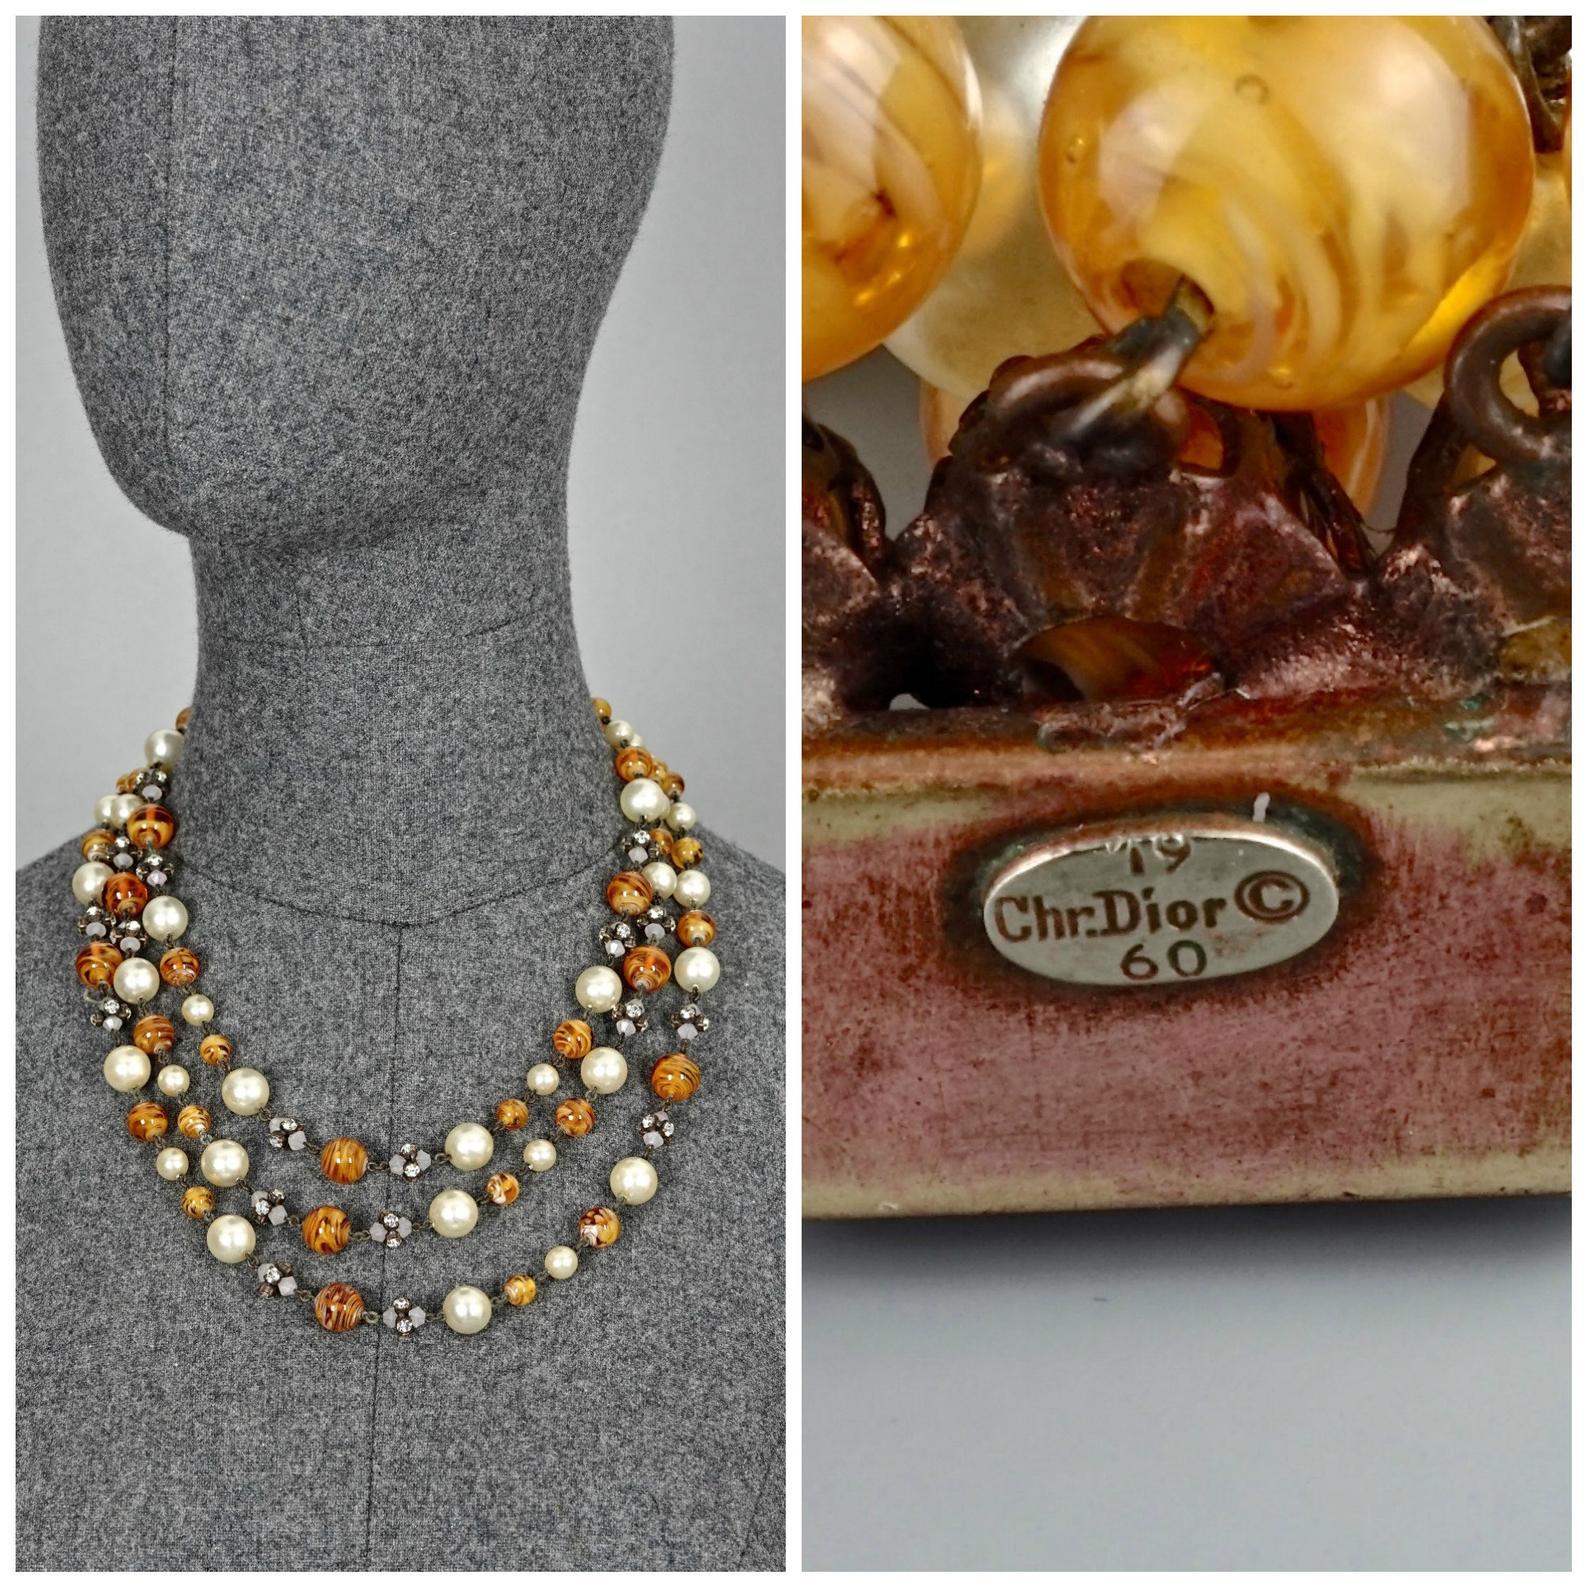 Vintage 1960 CHRISTIAN DIOR Triple Strand Amber Glass and Pearl Necklace

Measurements:
Height: 1.97 inches (5 cm)
Wearable Length: 25 inches (49.5 cm)

Features:
- 100% authentic CHRISTIAN DIOR.
- 3 tiered/ strand of glass pearls , glass beads and